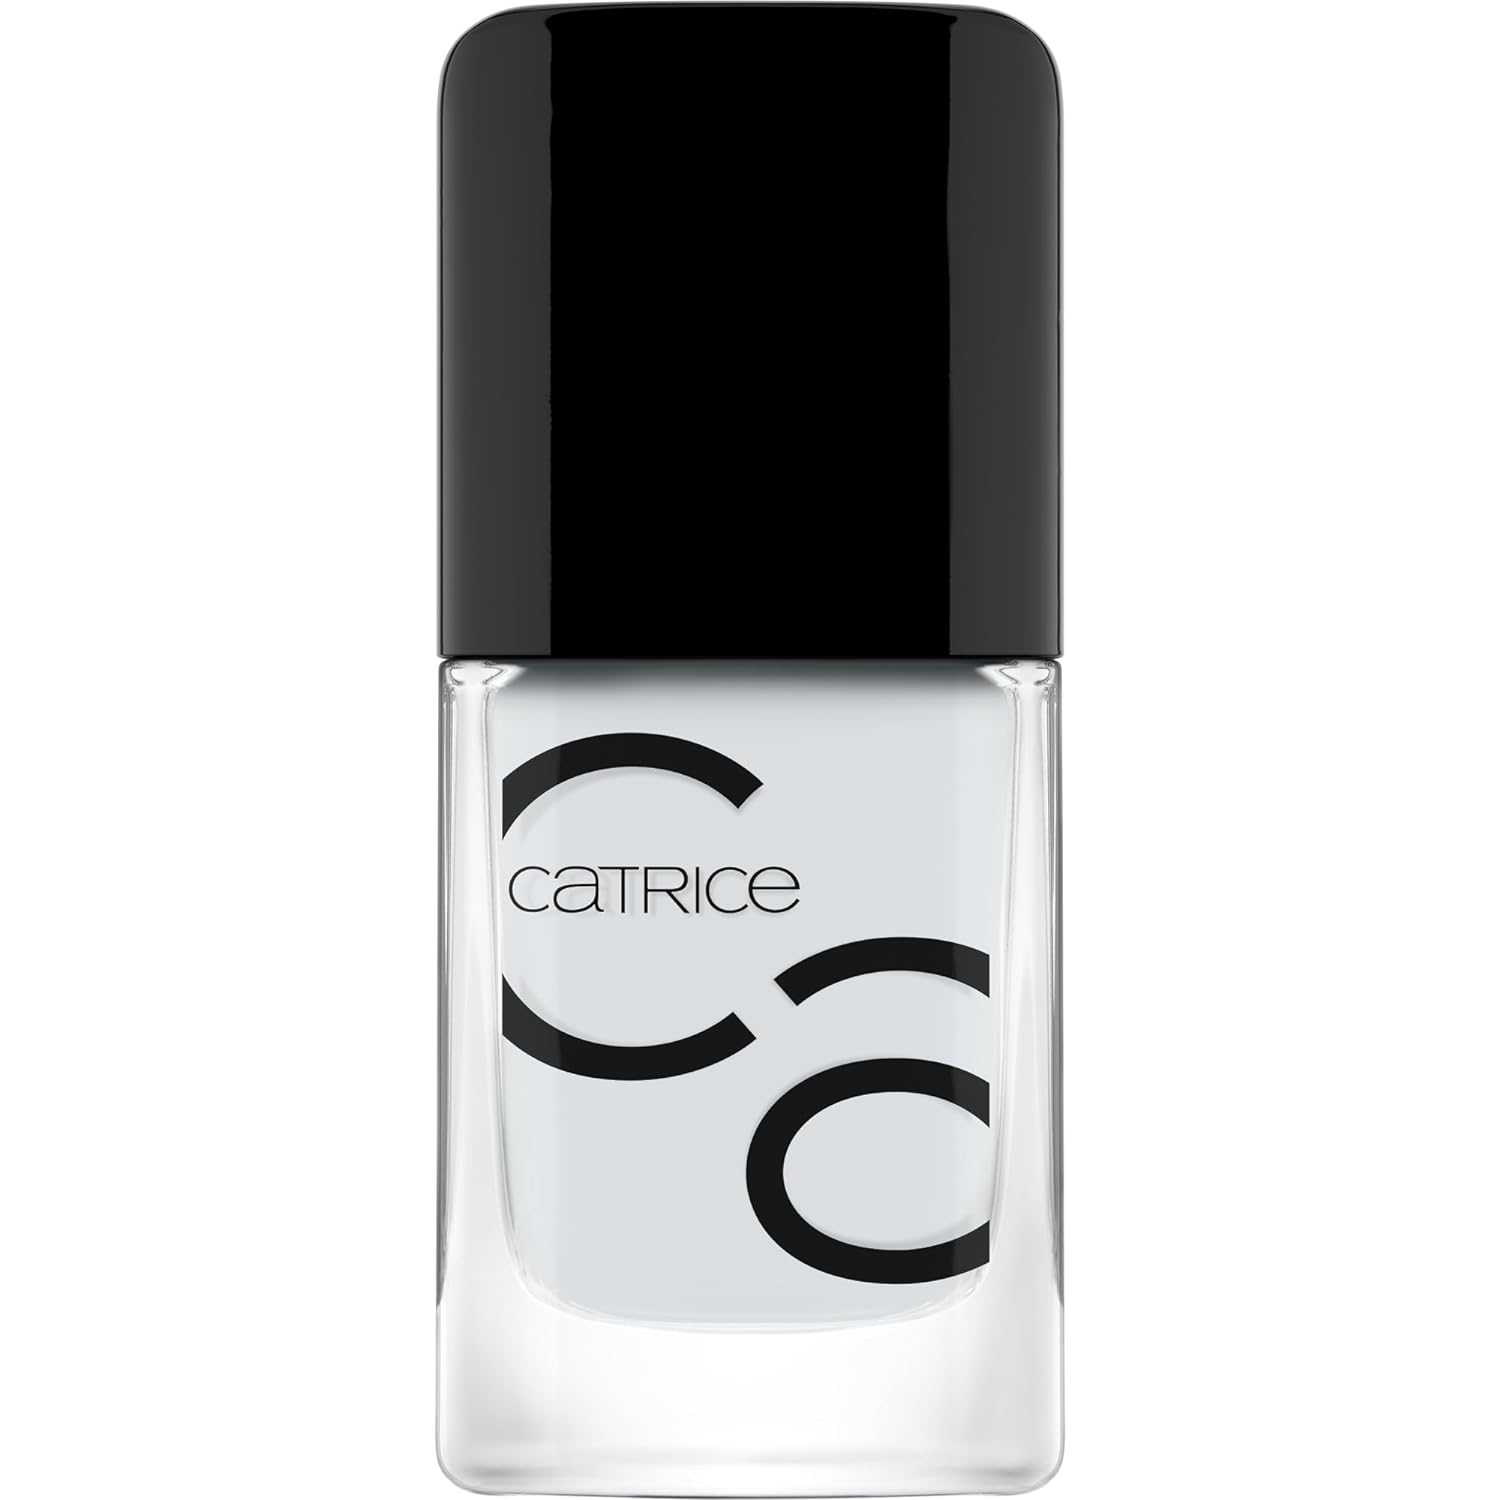 Catrice Catrice Iconails Gel Lacquer, Nail Polish, No. 175, Gray, Long-Lasting, Shiny, Acetone-Free, vegan, no Microplastic Particles, no Preservatives, Pack of 10.5 ml